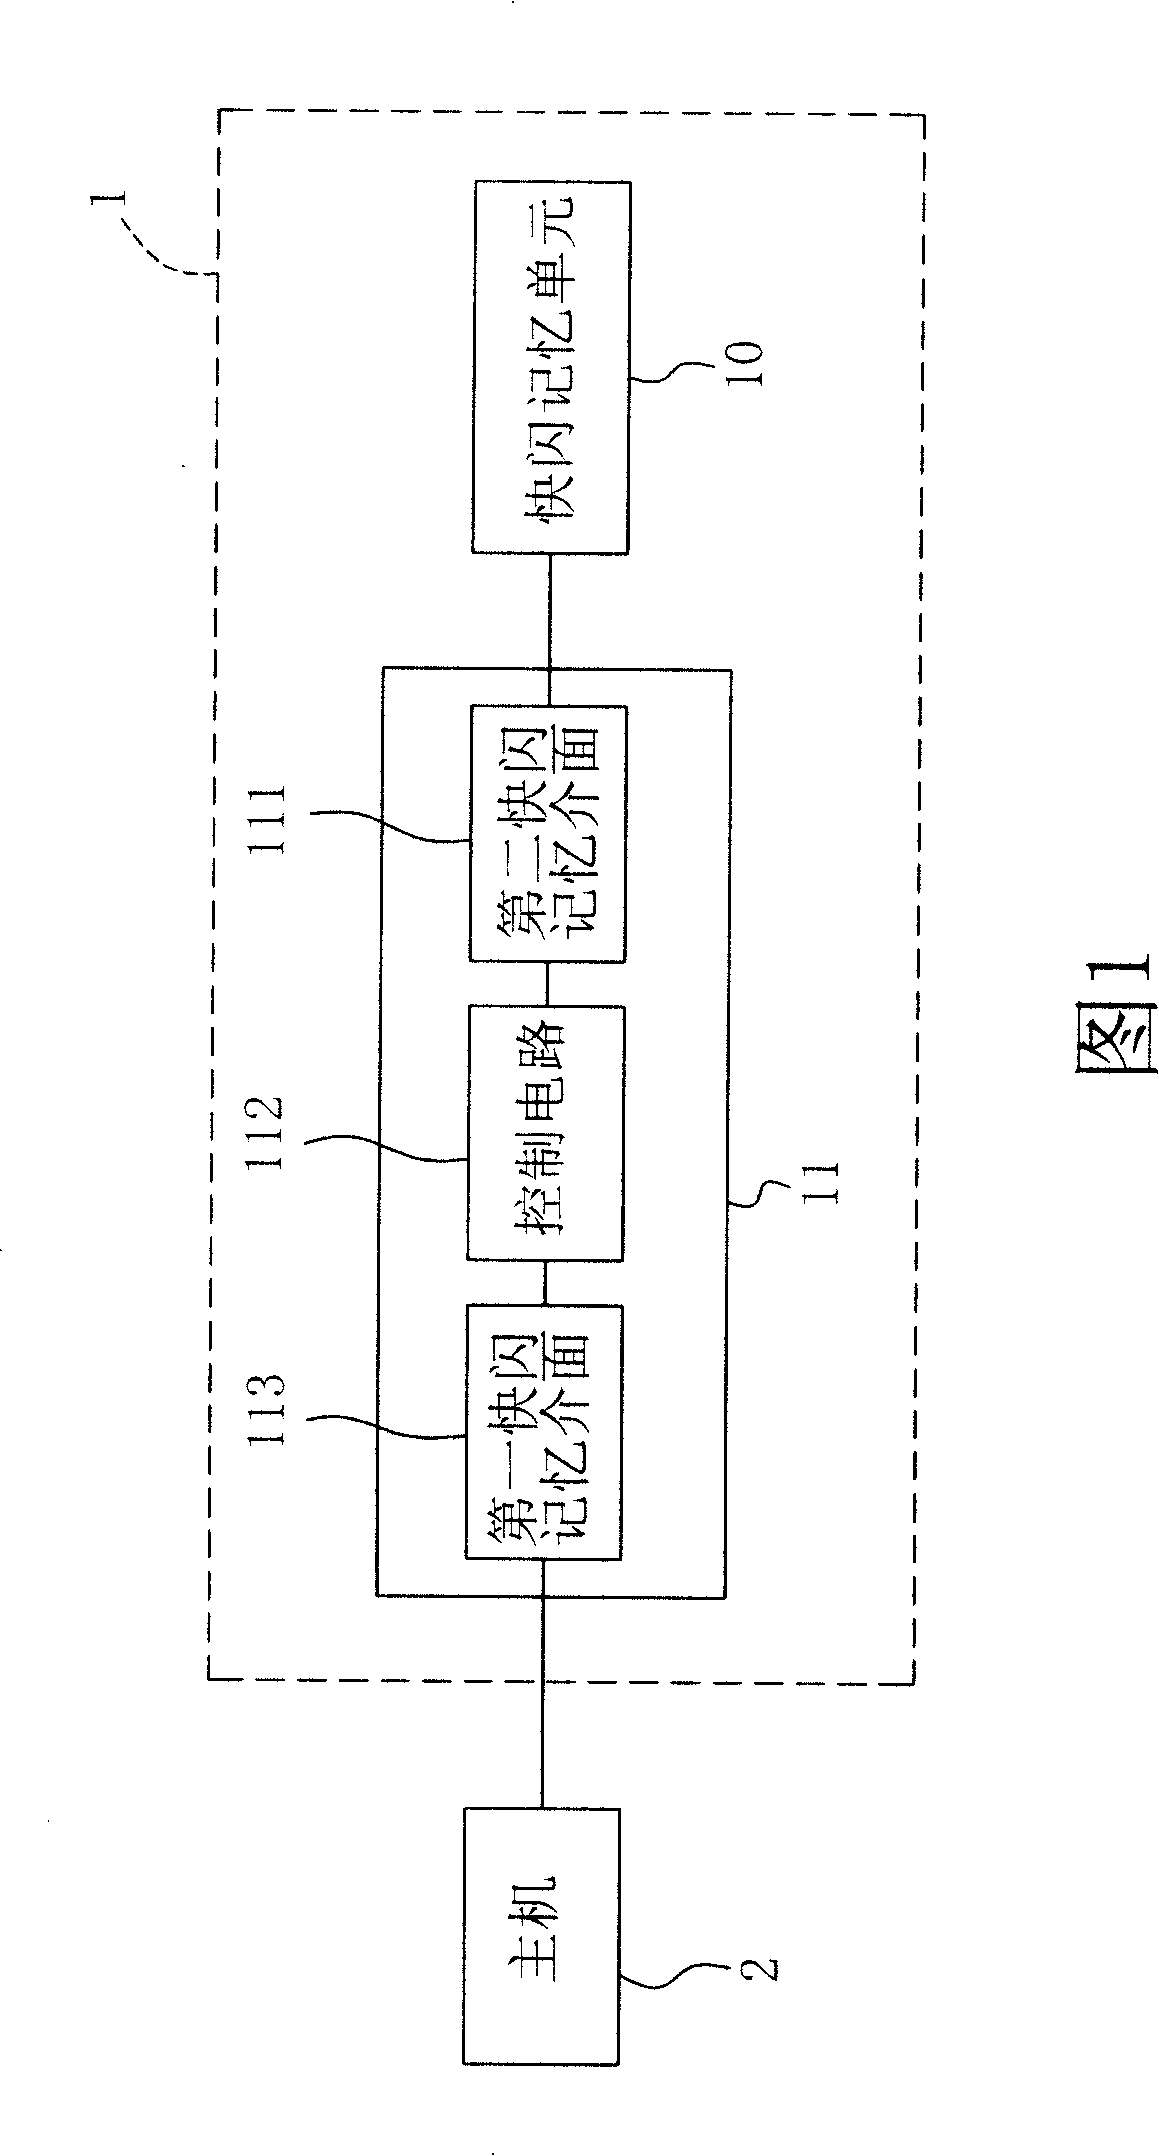 Quick flashing memory device with characteristic commutation function